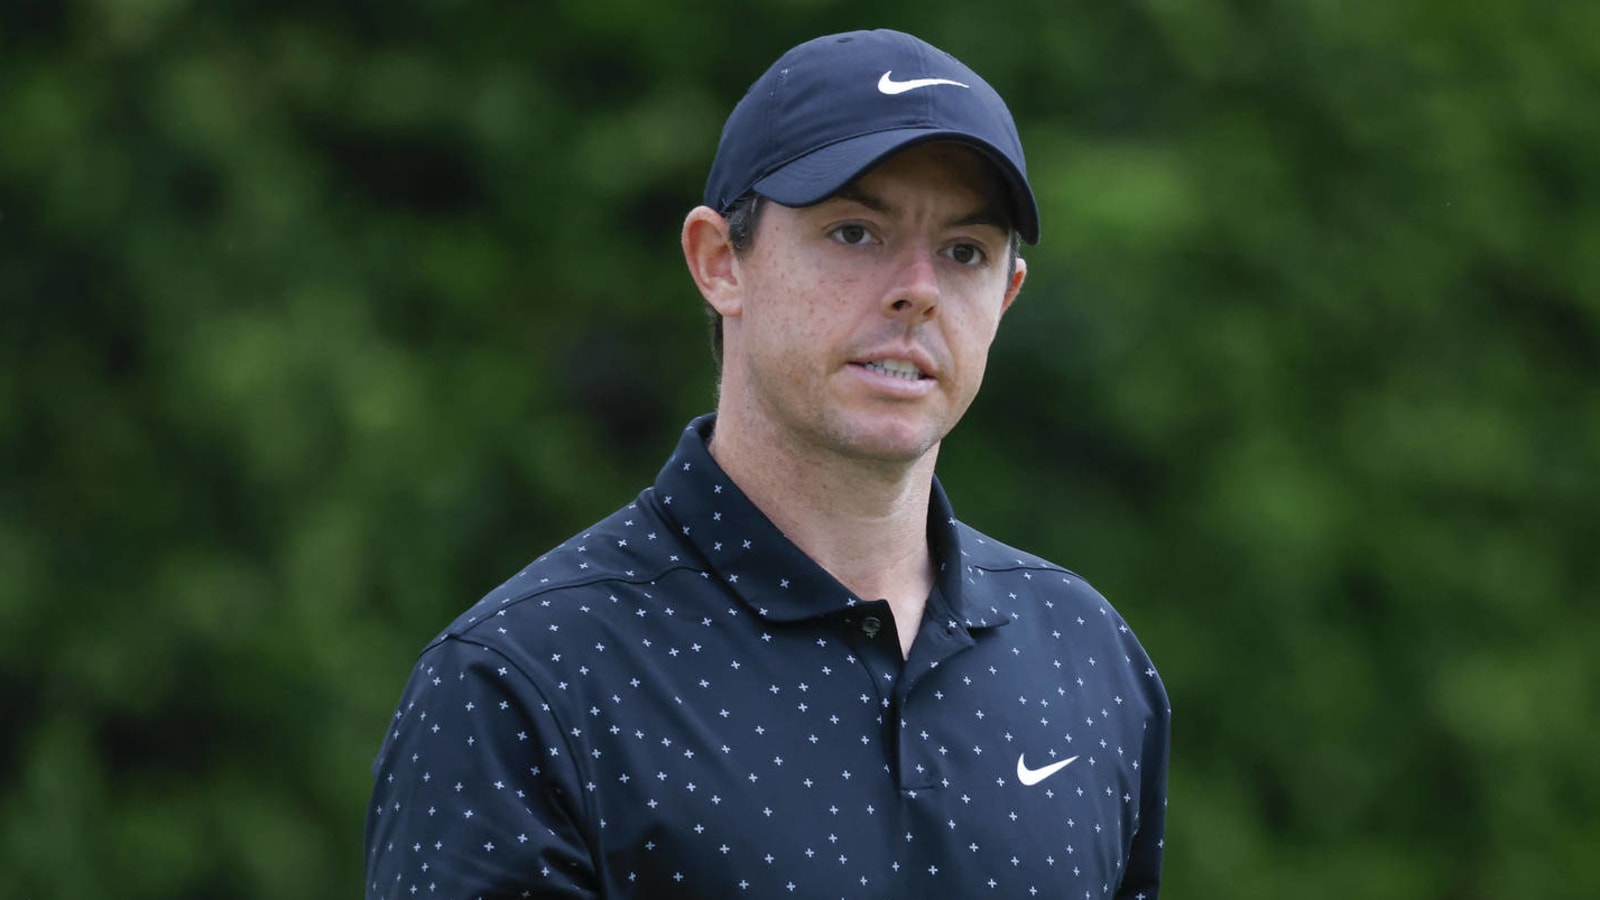 Rory McIlroy not looking to change caddies, coach